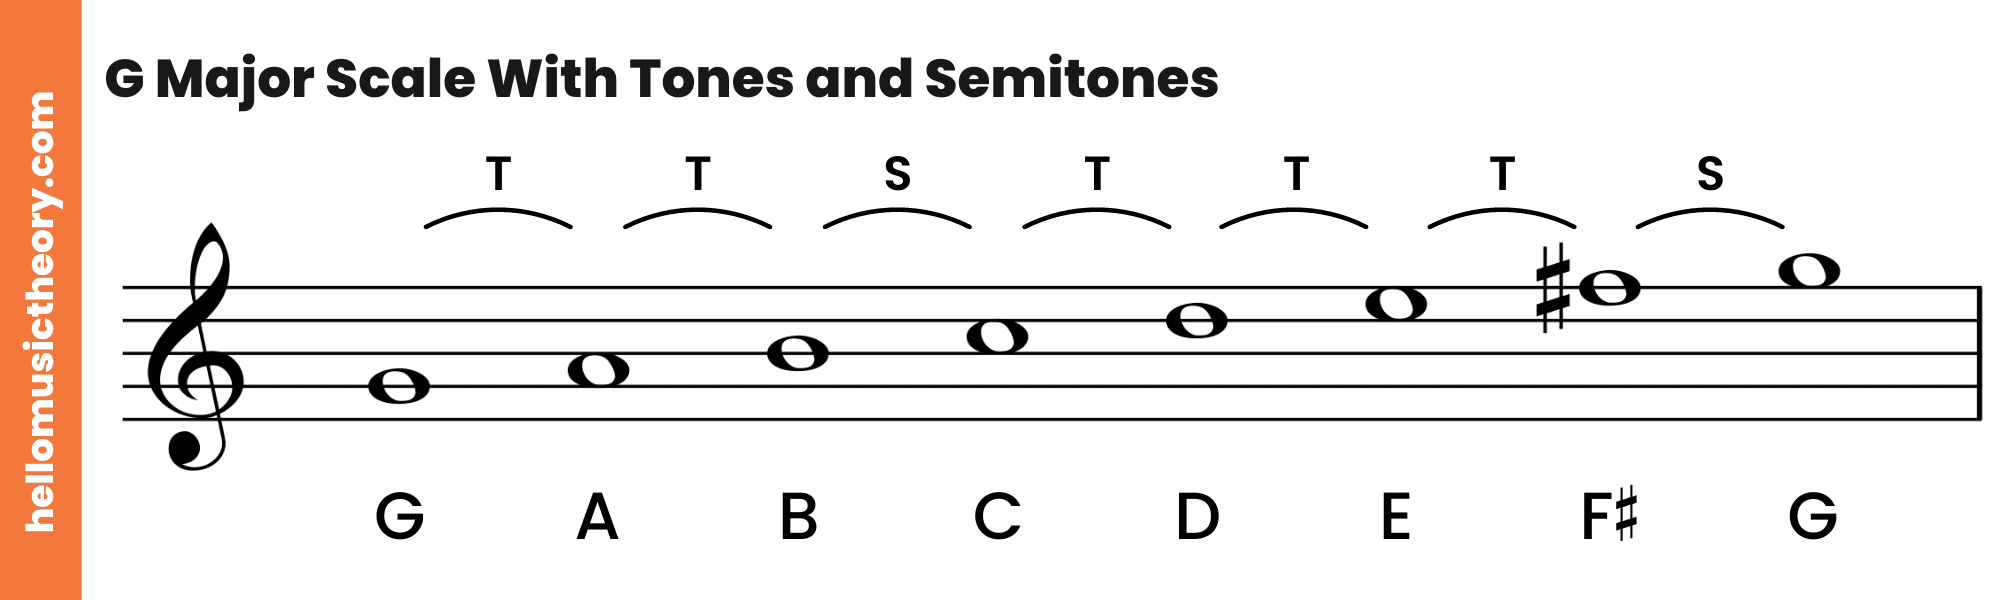 G Major Scale Treble Clef With Tones and Semitones